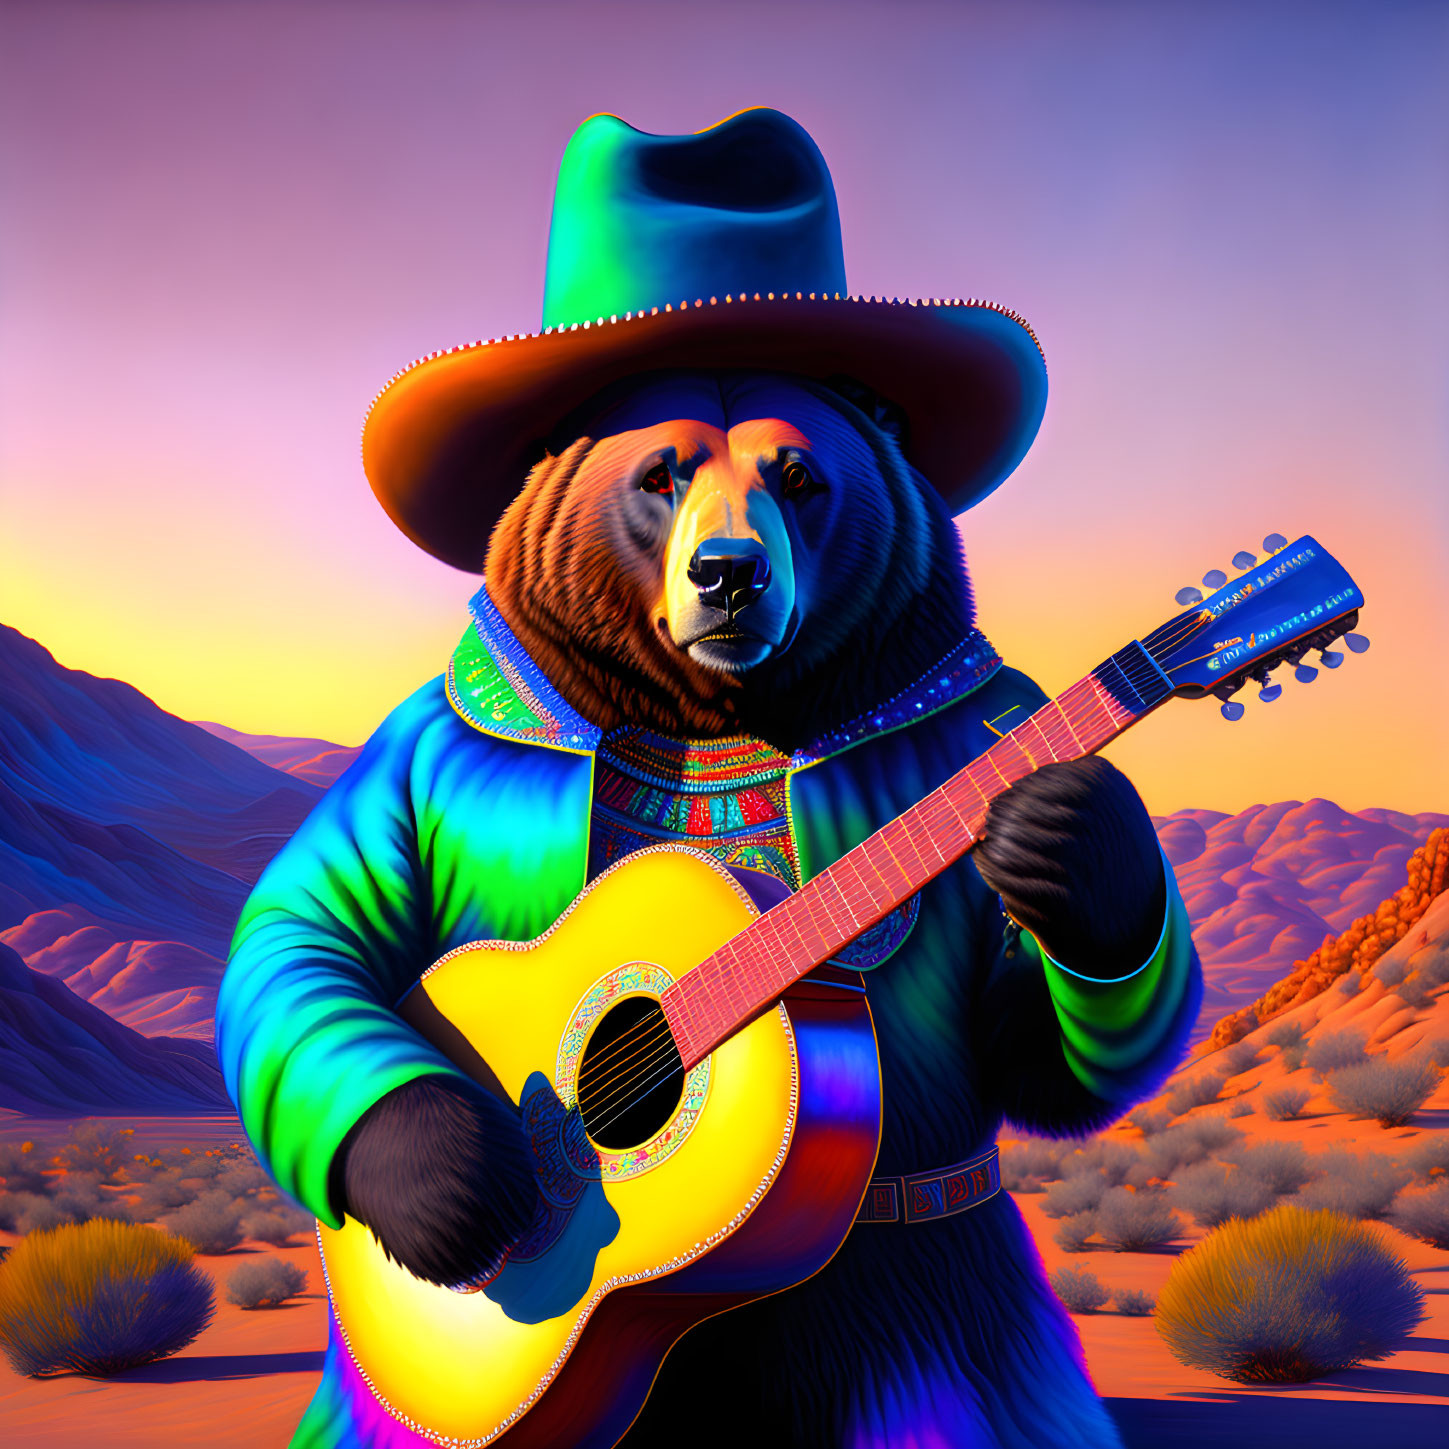 Oso playing the guitar